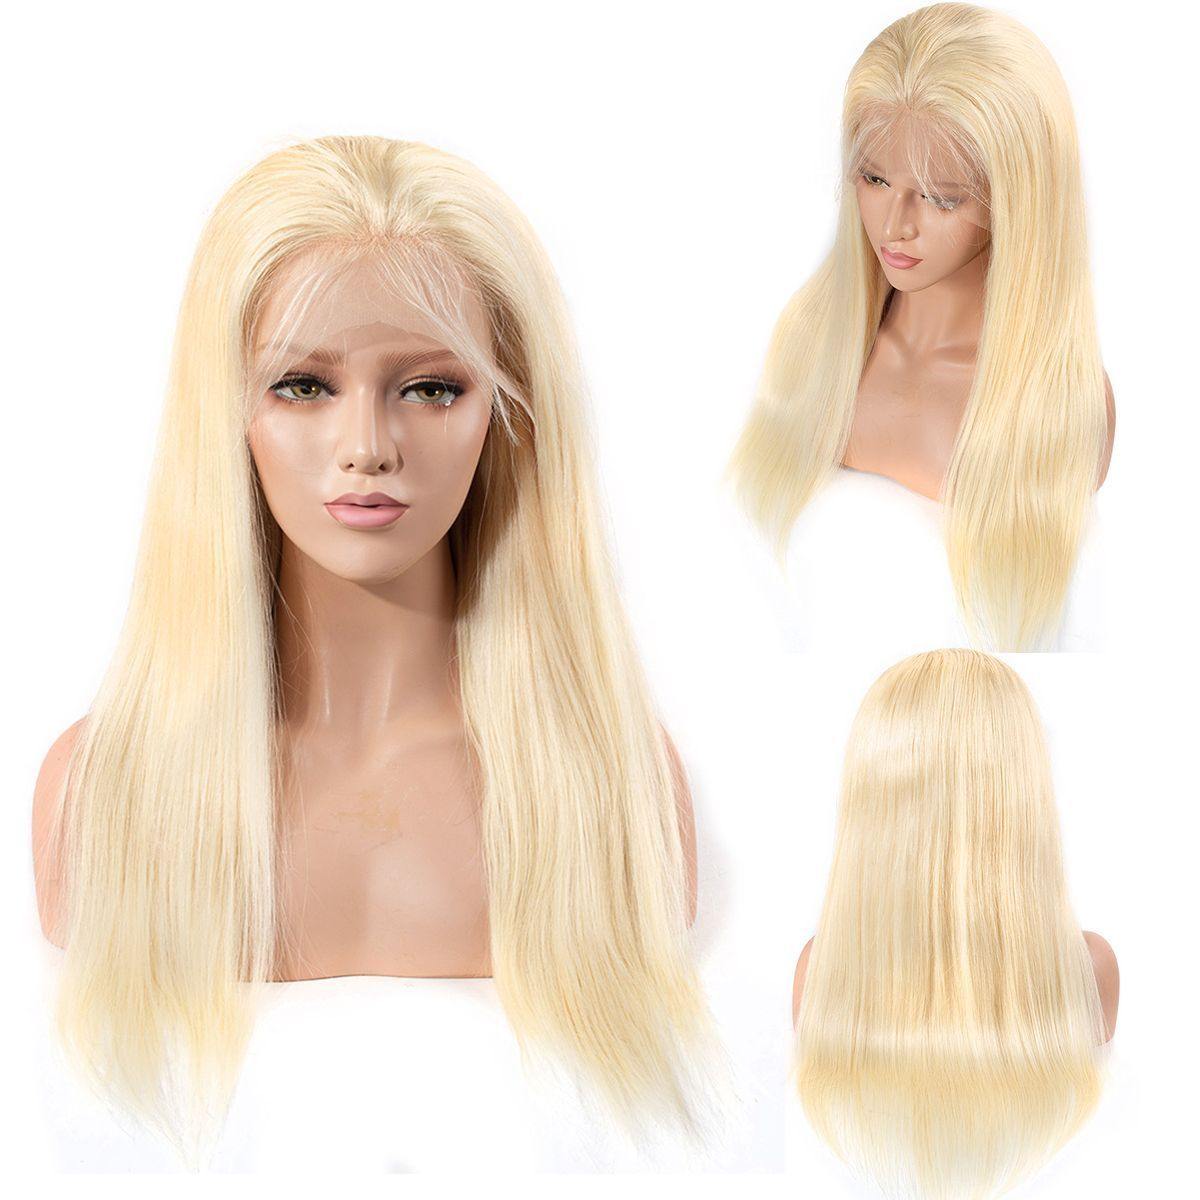 Withme Hair Brazilian 613 Blonde 13x4 Lace Front Wig Straight Free Part Human Hair Wigs Pre Plucked 130% Density Blonde Wig - Withme Hair